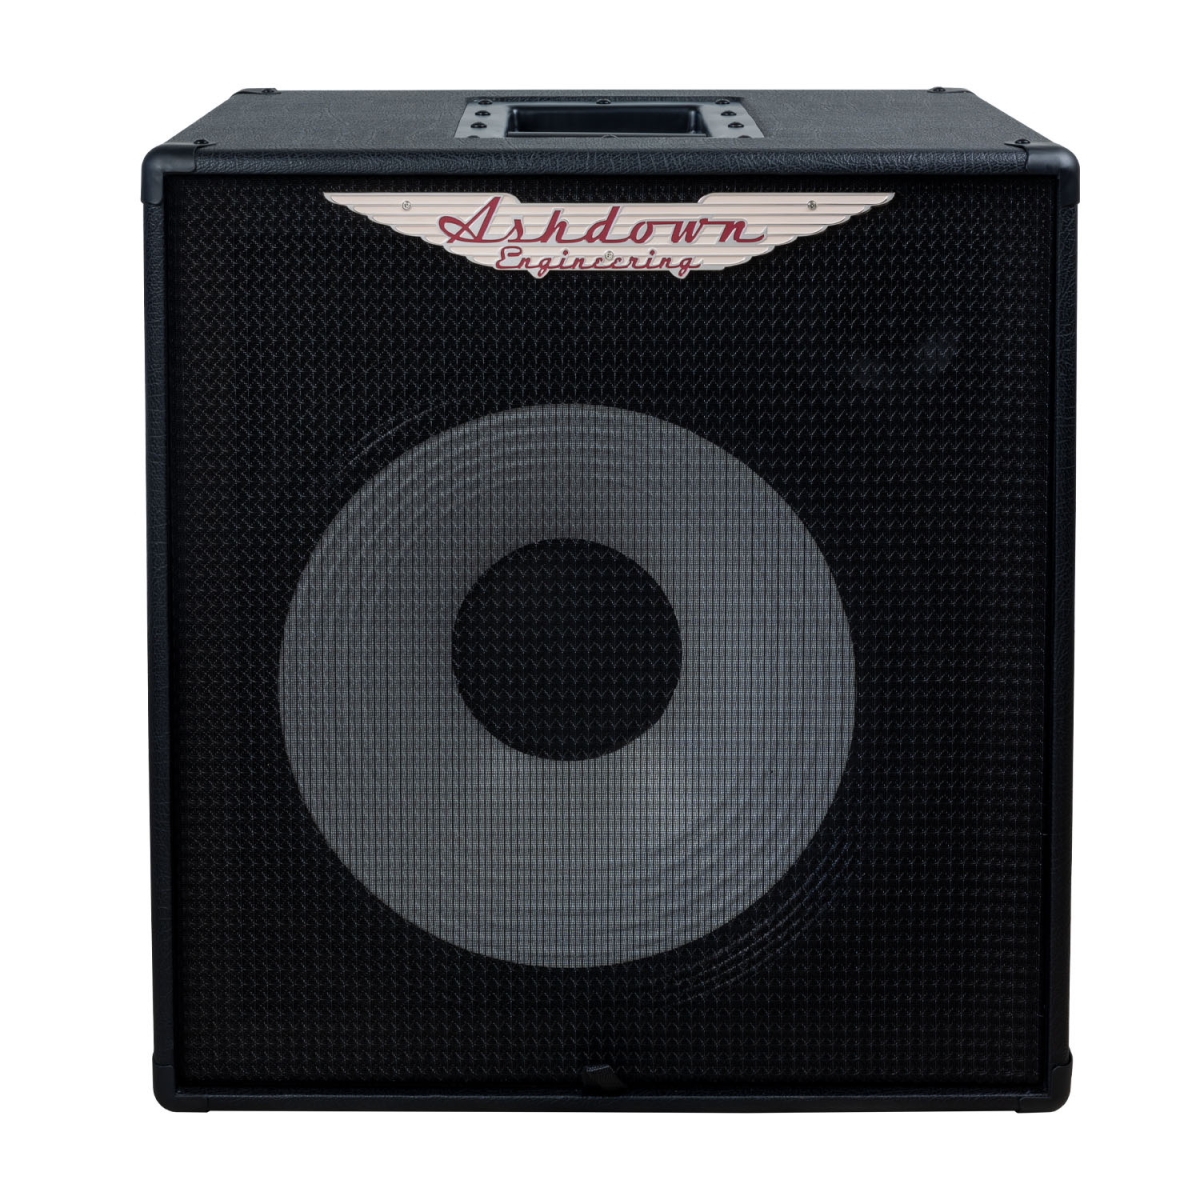 Picture of KMC Music RM115TEVOII-U 300 watts 15 in. Super Lightweight Bass Cabinet